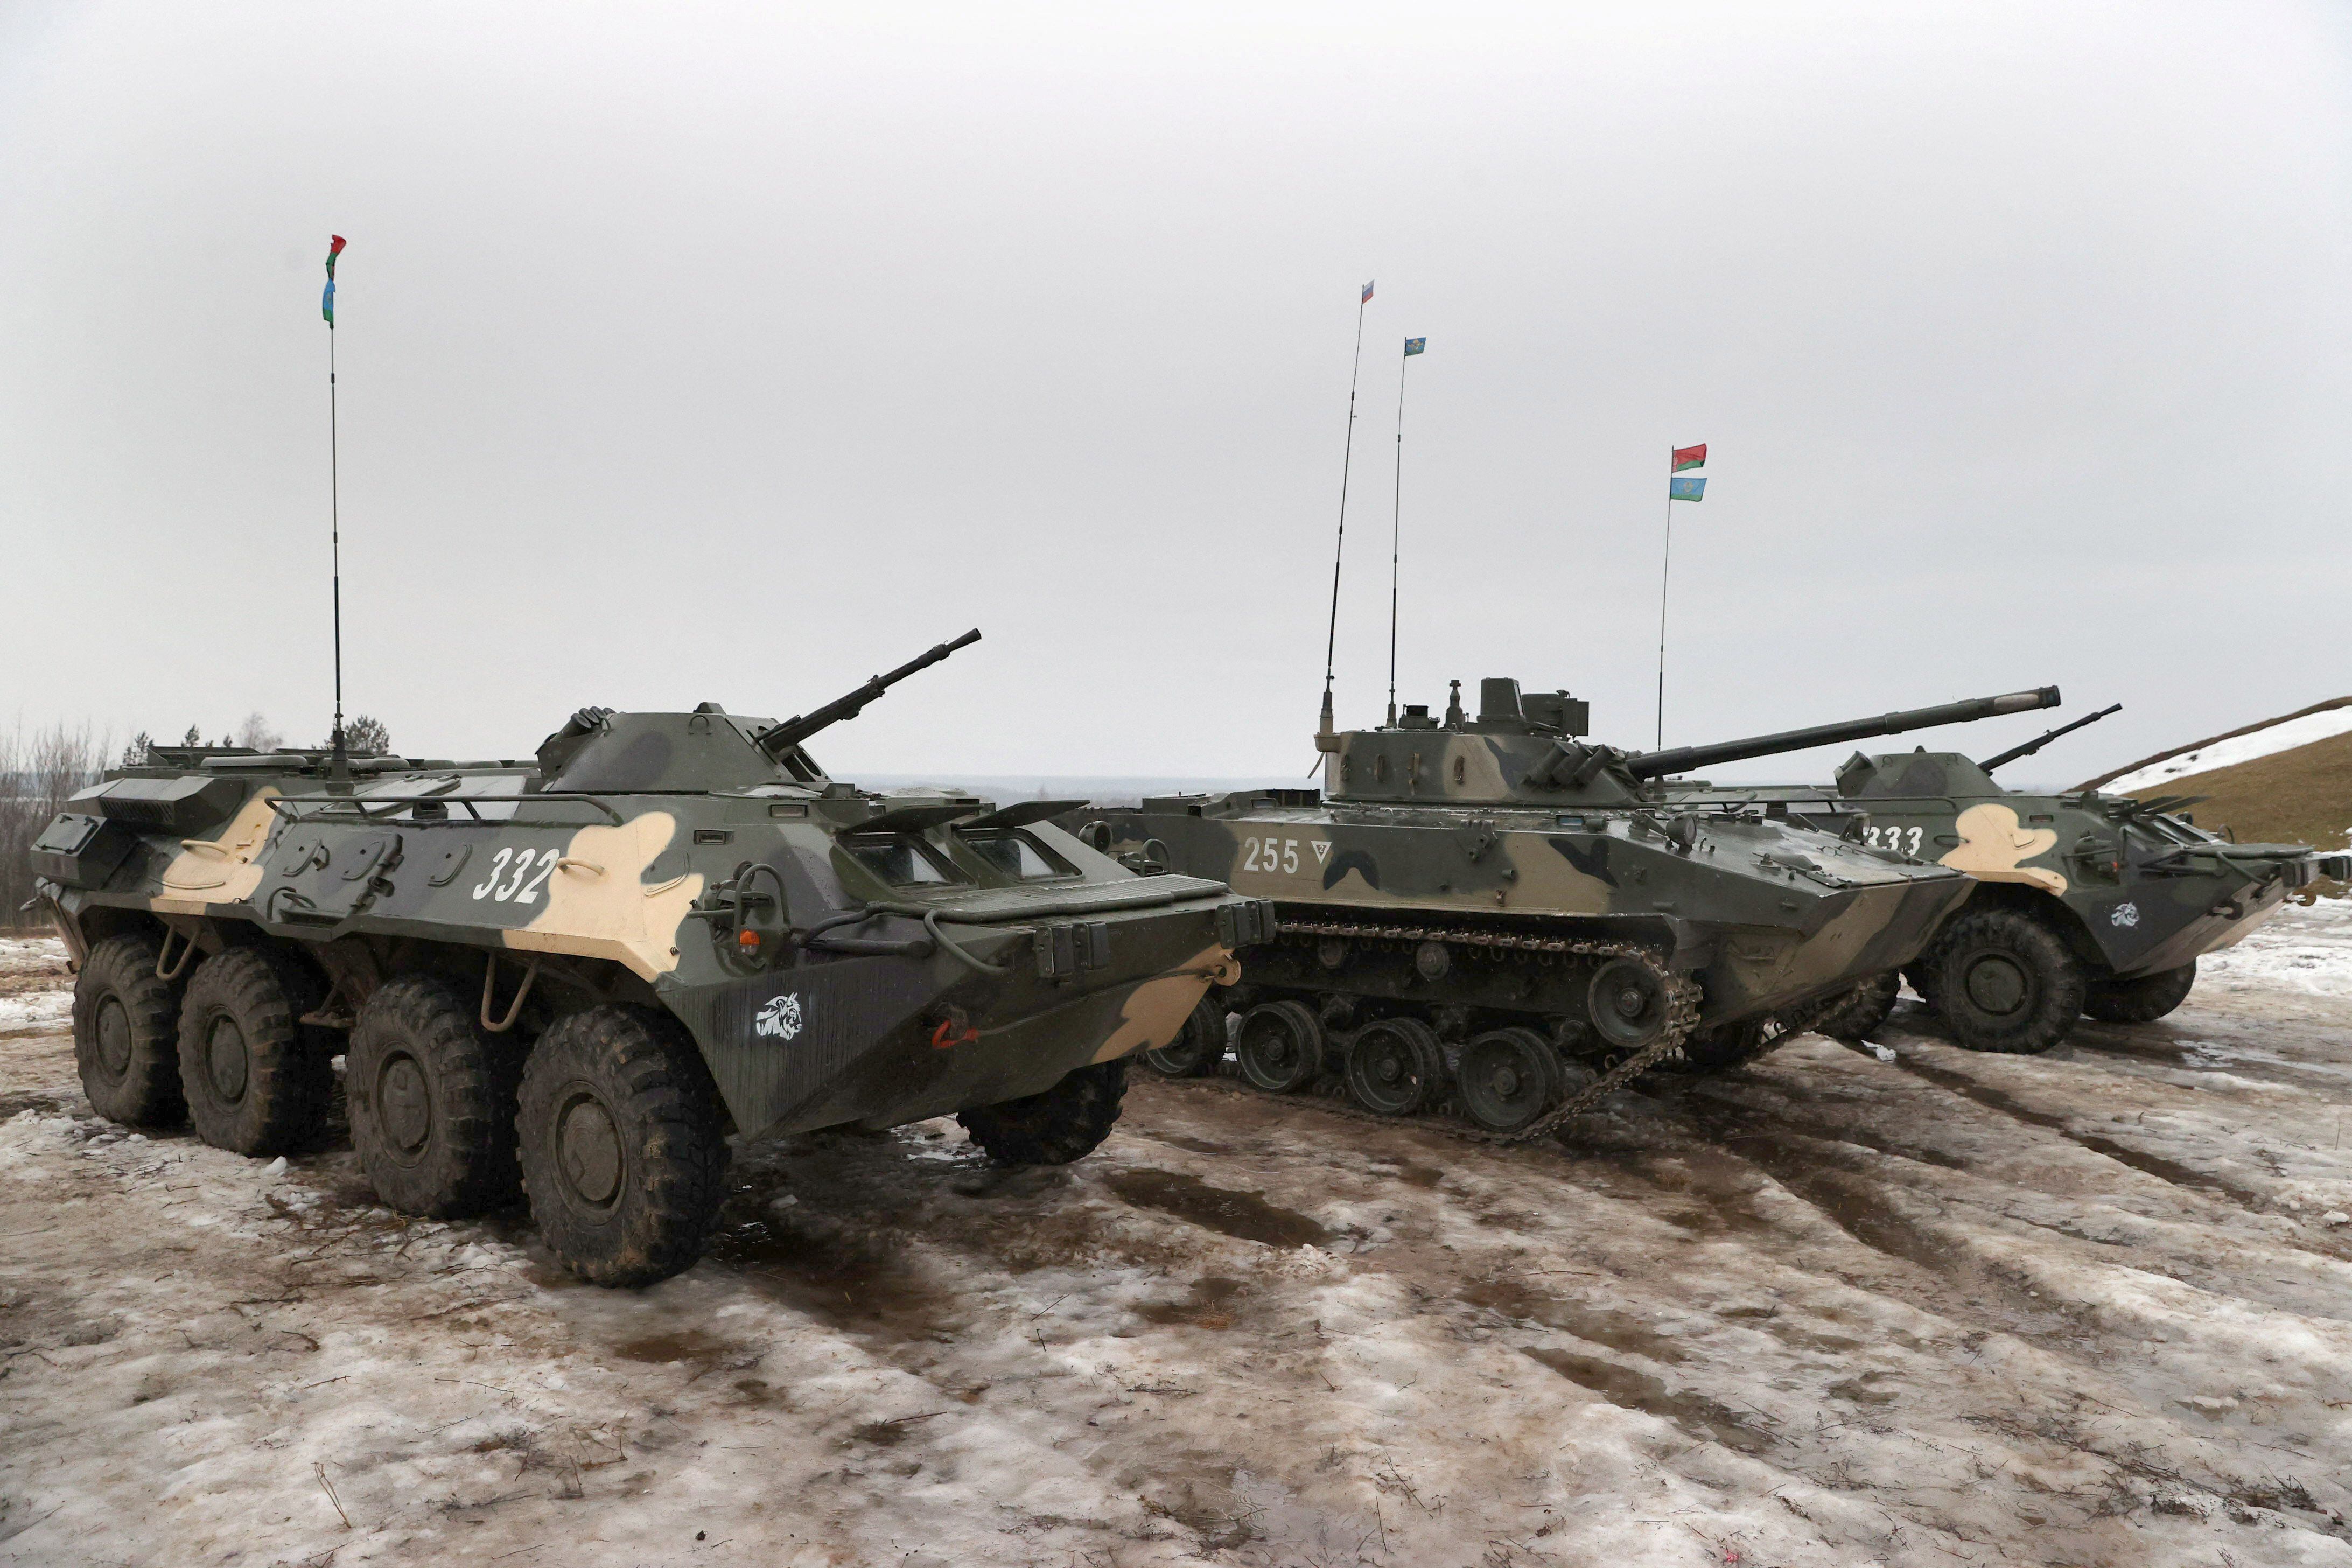 The Russian and Belarusian armed forces carry out joint military exercises in the Mogilev region, in Belarus, exercises that continue to worry NATO and Ukraine.  REUTERS